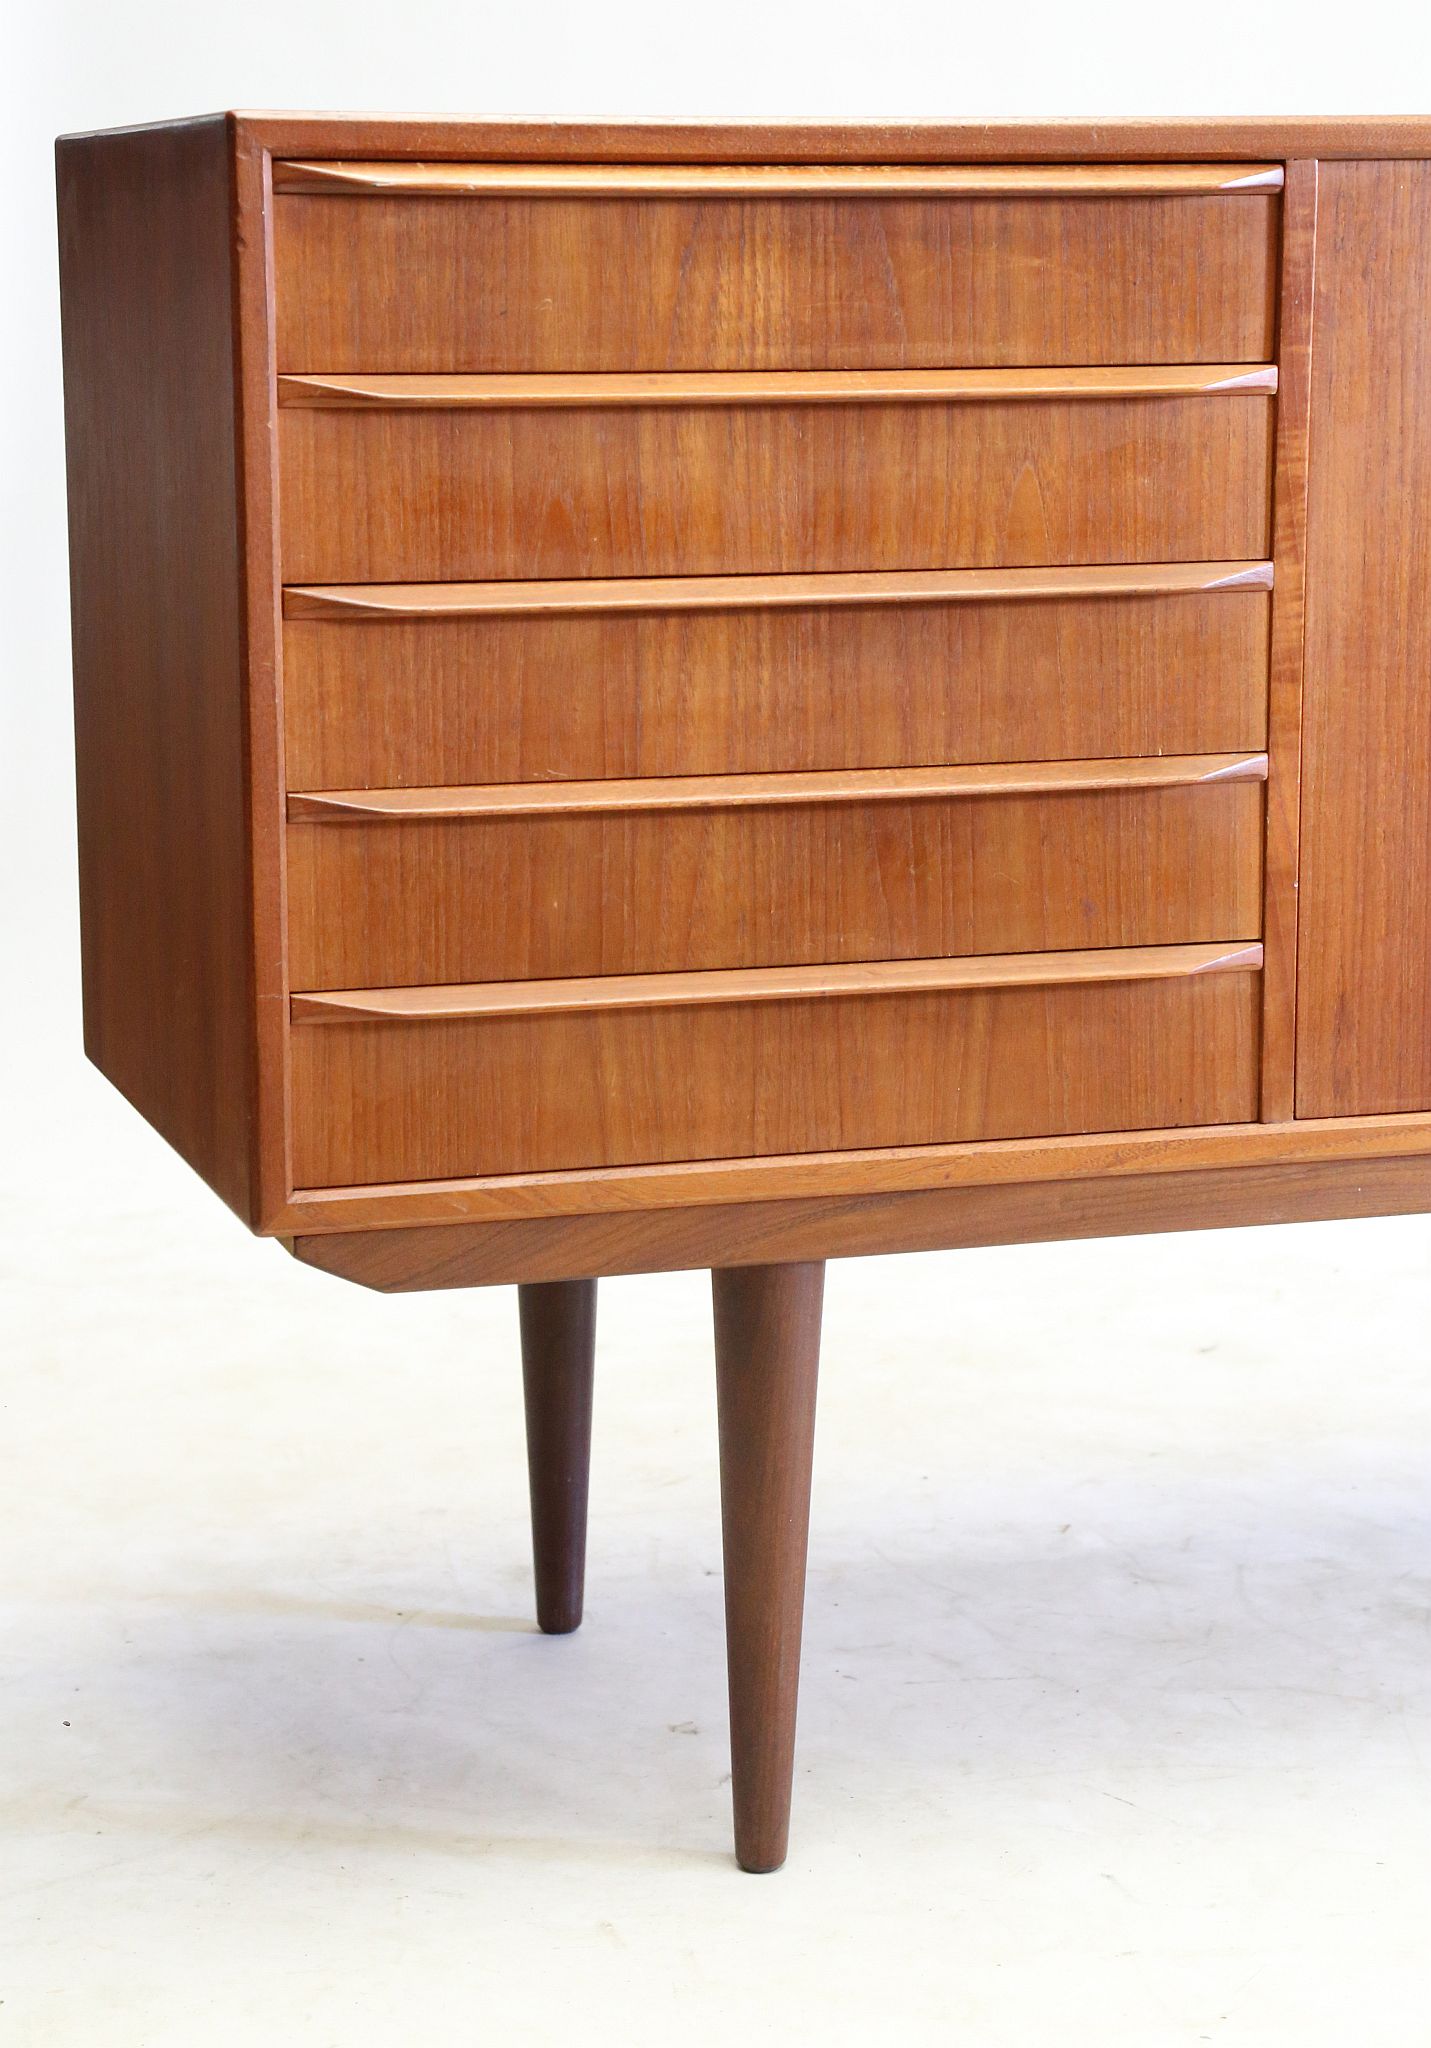 A DANISH 1960s TEAK SIDEBOARD, attributed to Svend - Image 6 of 10